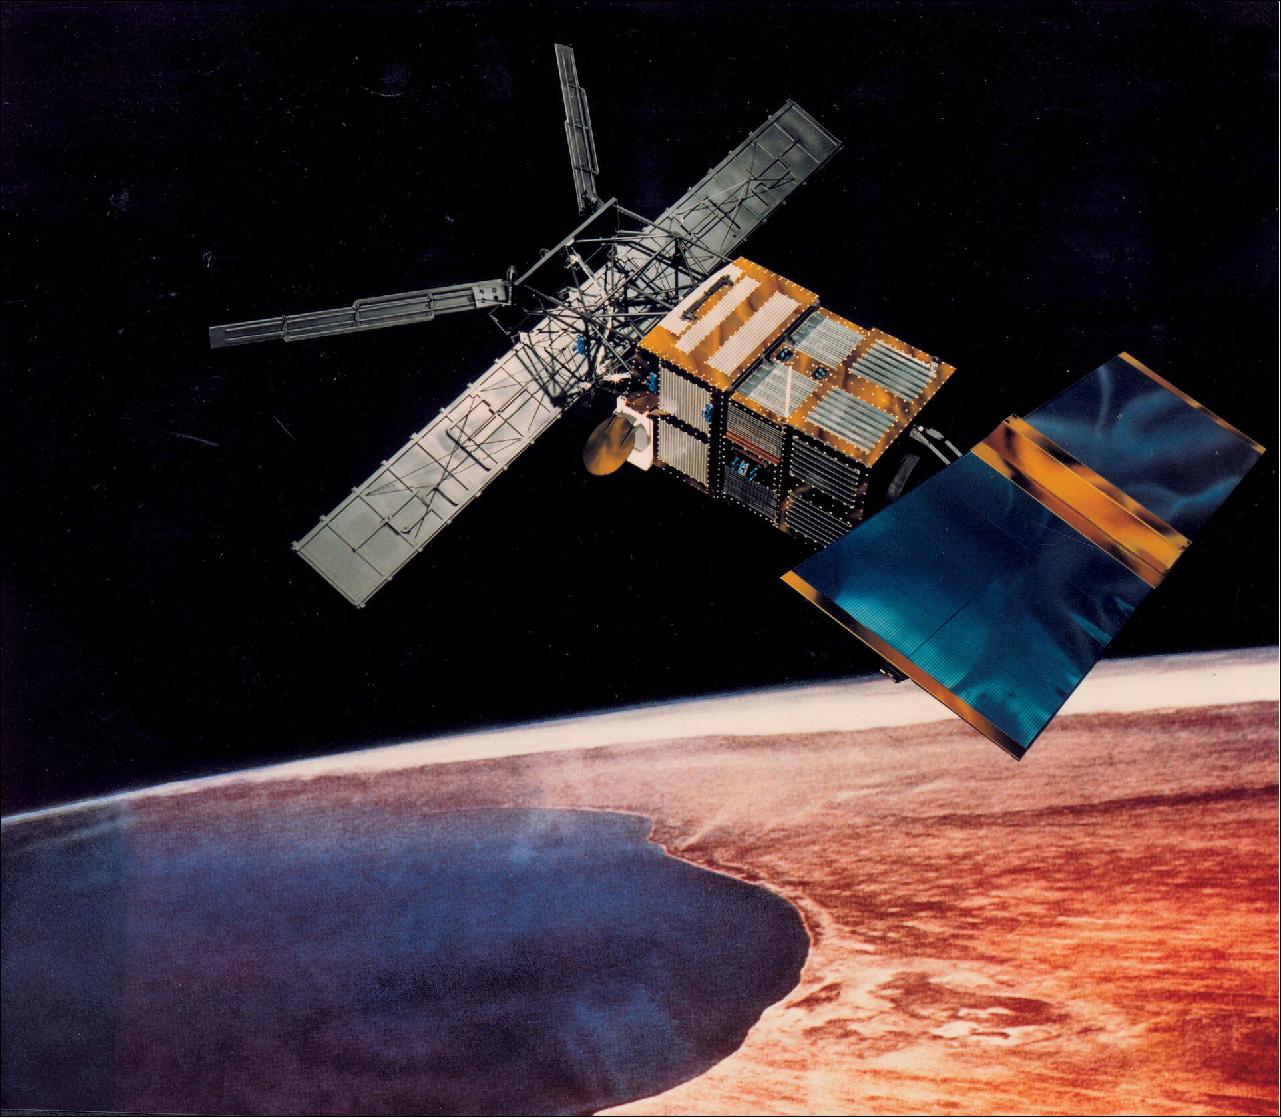 Figure 8: Illustration of the ERS-2 satellite, launched on Ariane 4 on 21 April 1995 from Kourou (image credit: ESA)